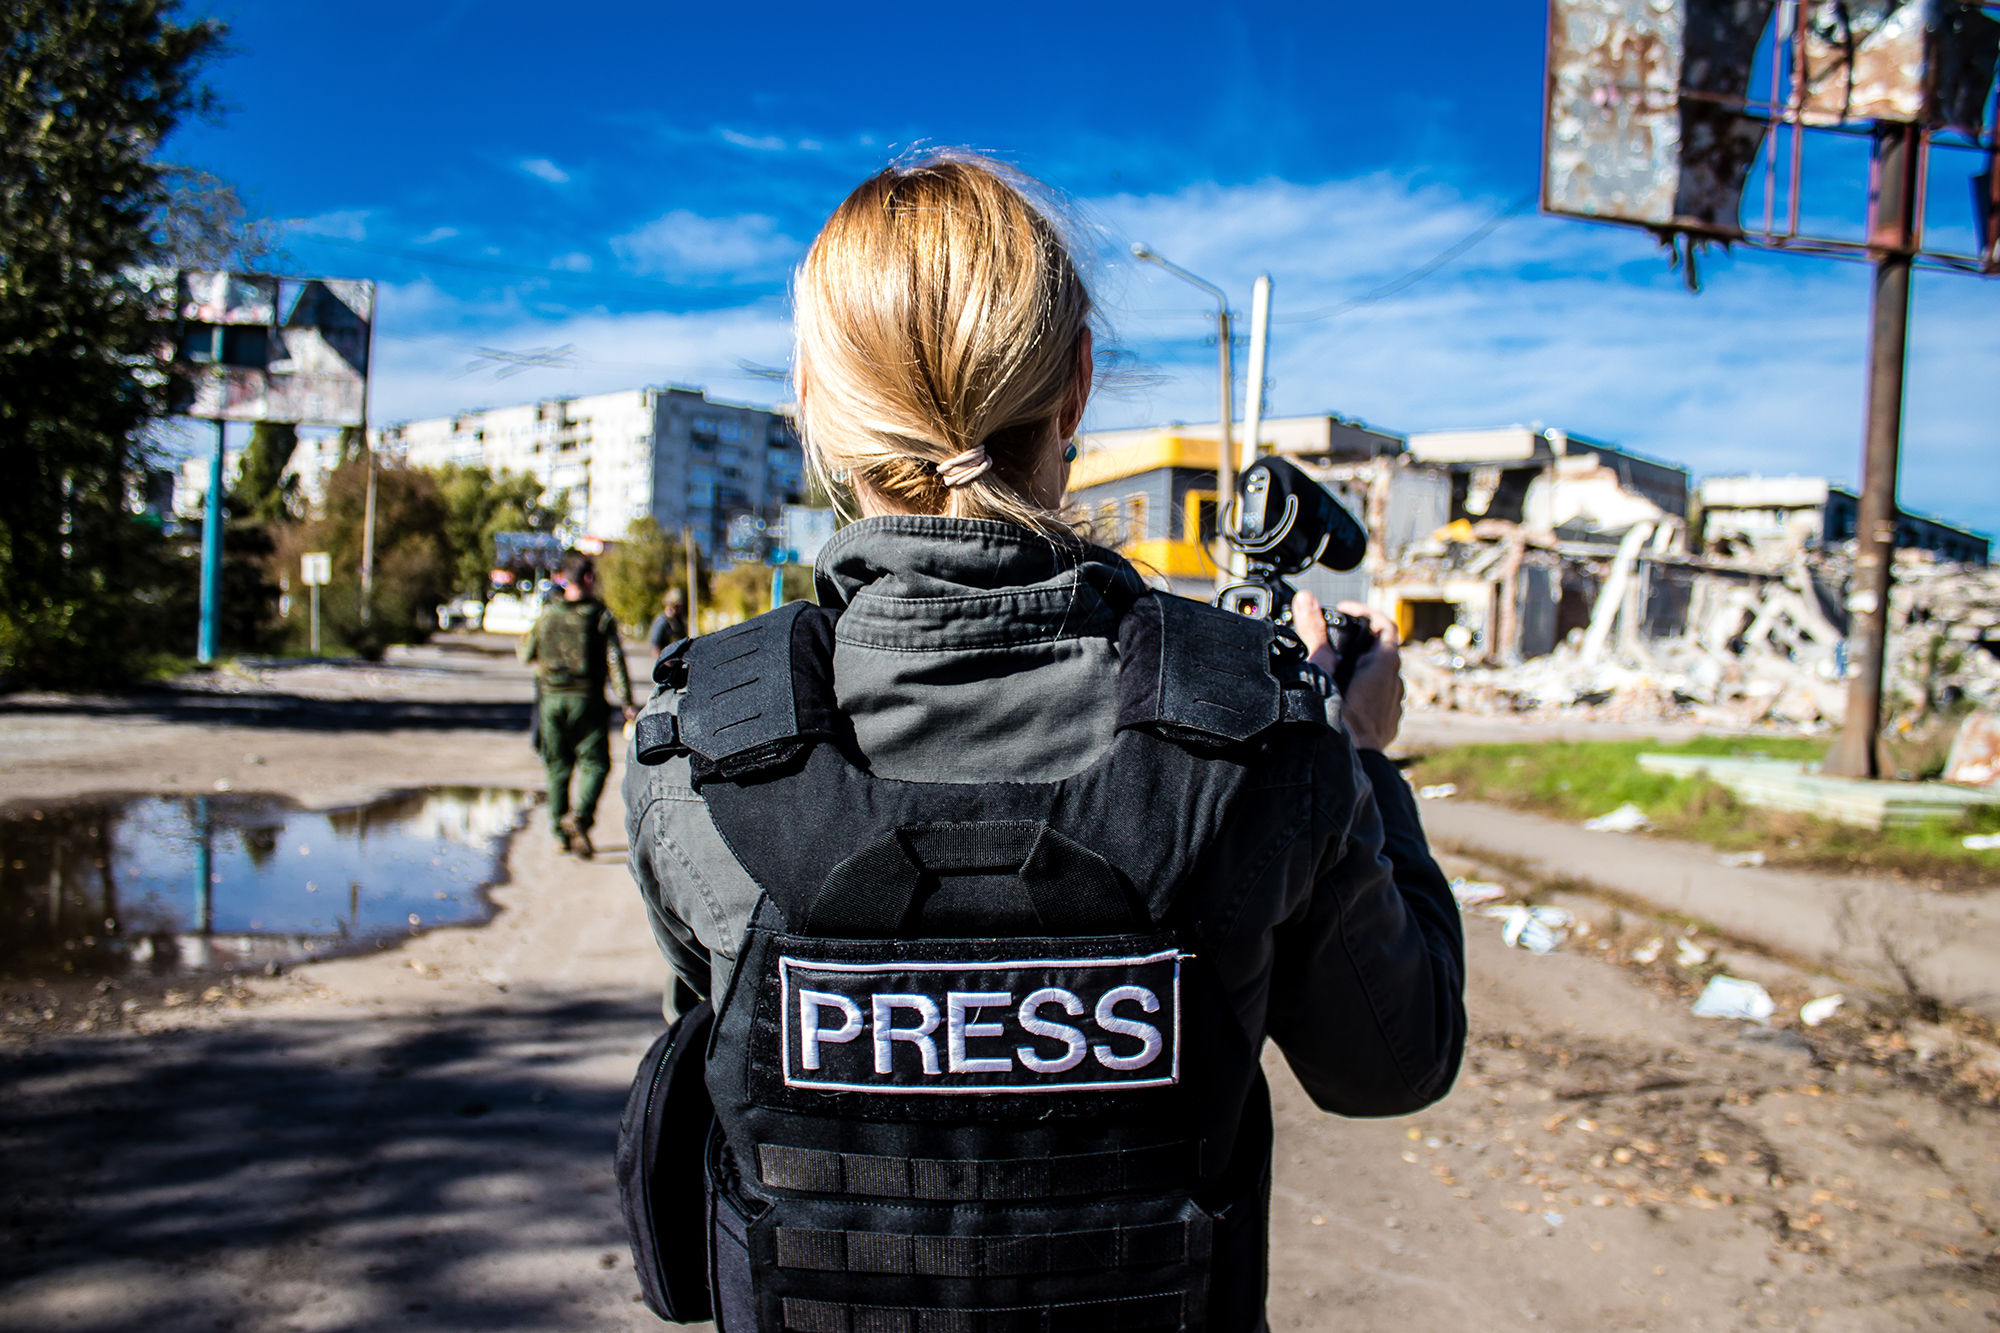 UNESCO, in partnership with the National Union of Journalists of Ukraine (NUJU) and the International Federation of Journalists (IFJ), has just launched a programme to support Ukrainian journalists with emergency grants to continue their work providing essential information to the public. 